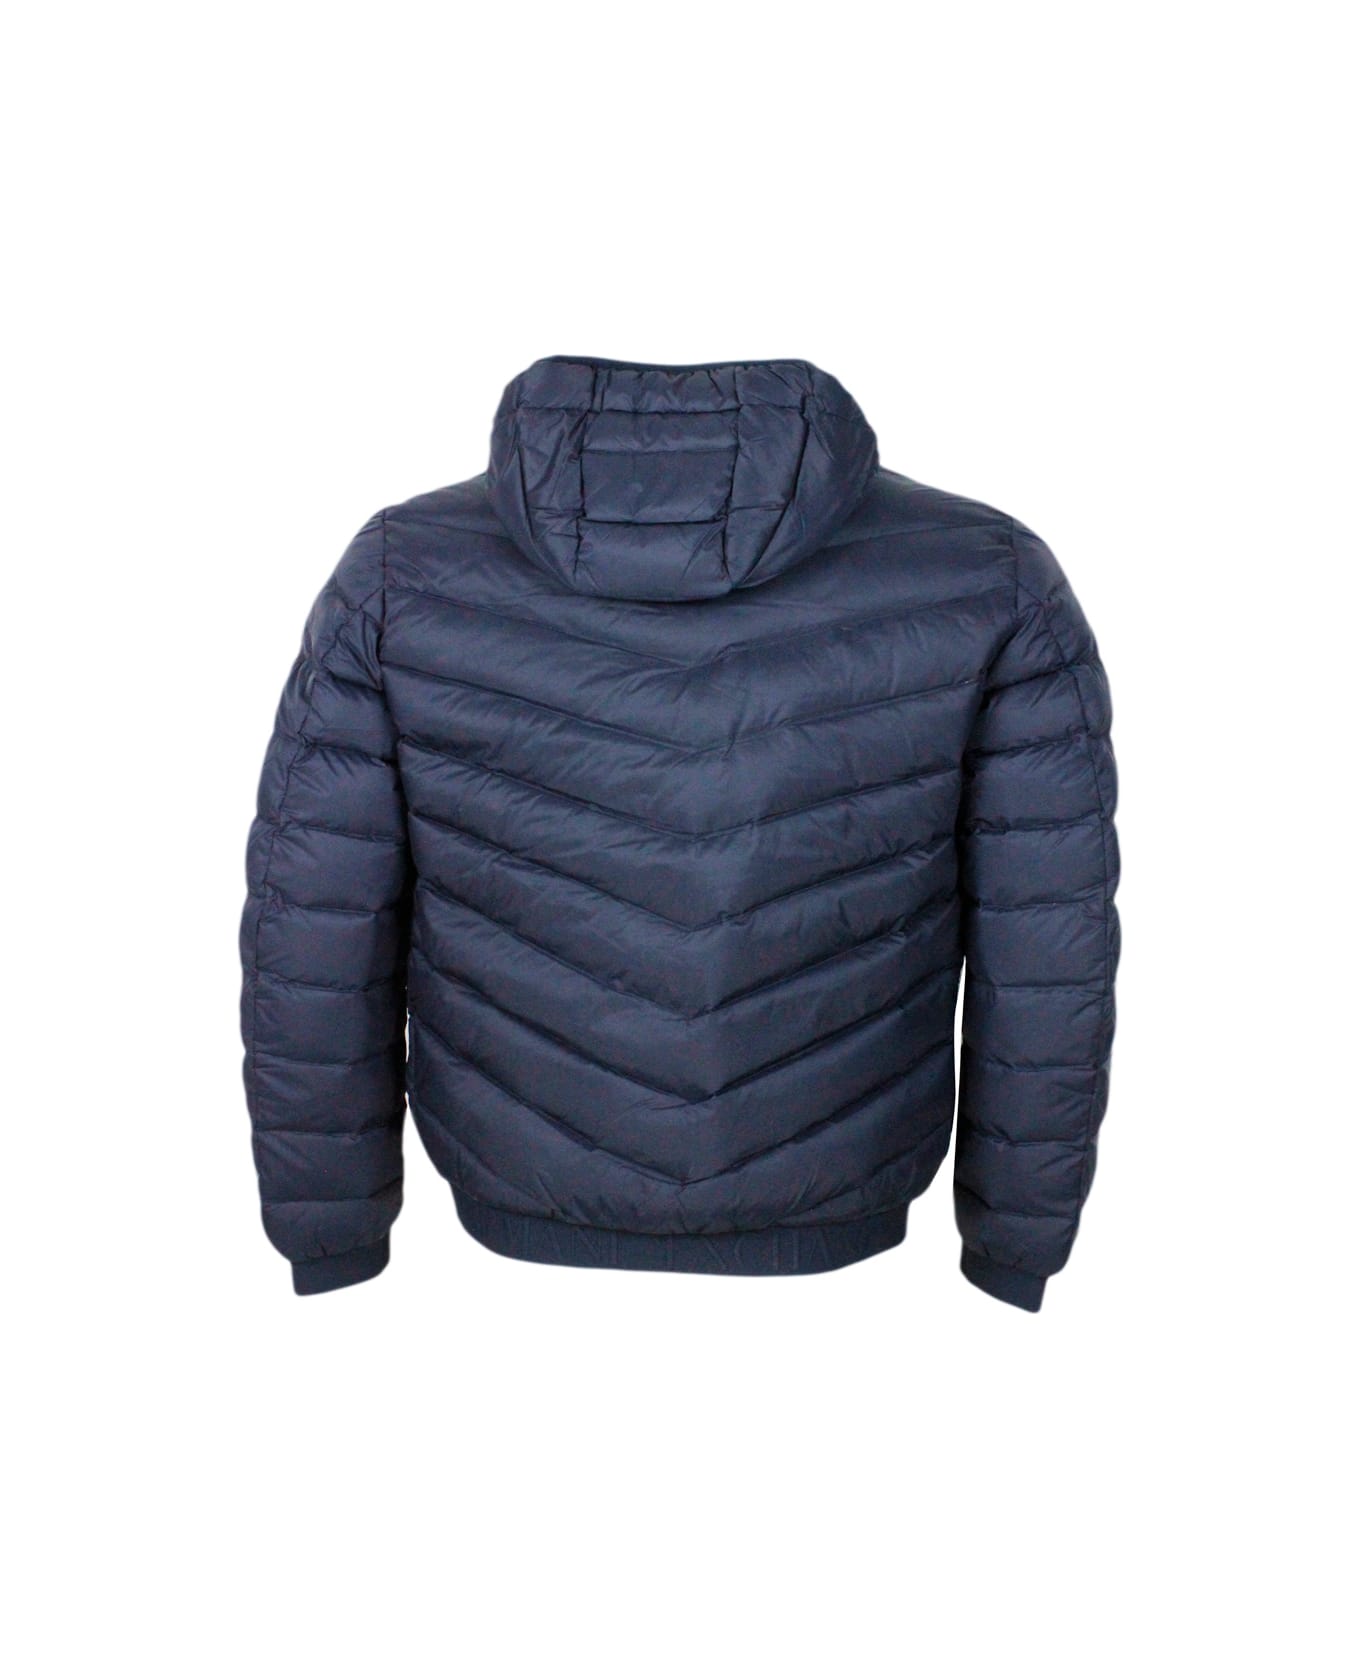 Armani Collezioni Light Down Jacket In Real Goose Down With Integrated Hood And Logoed Elastic At The Bottom - Blu